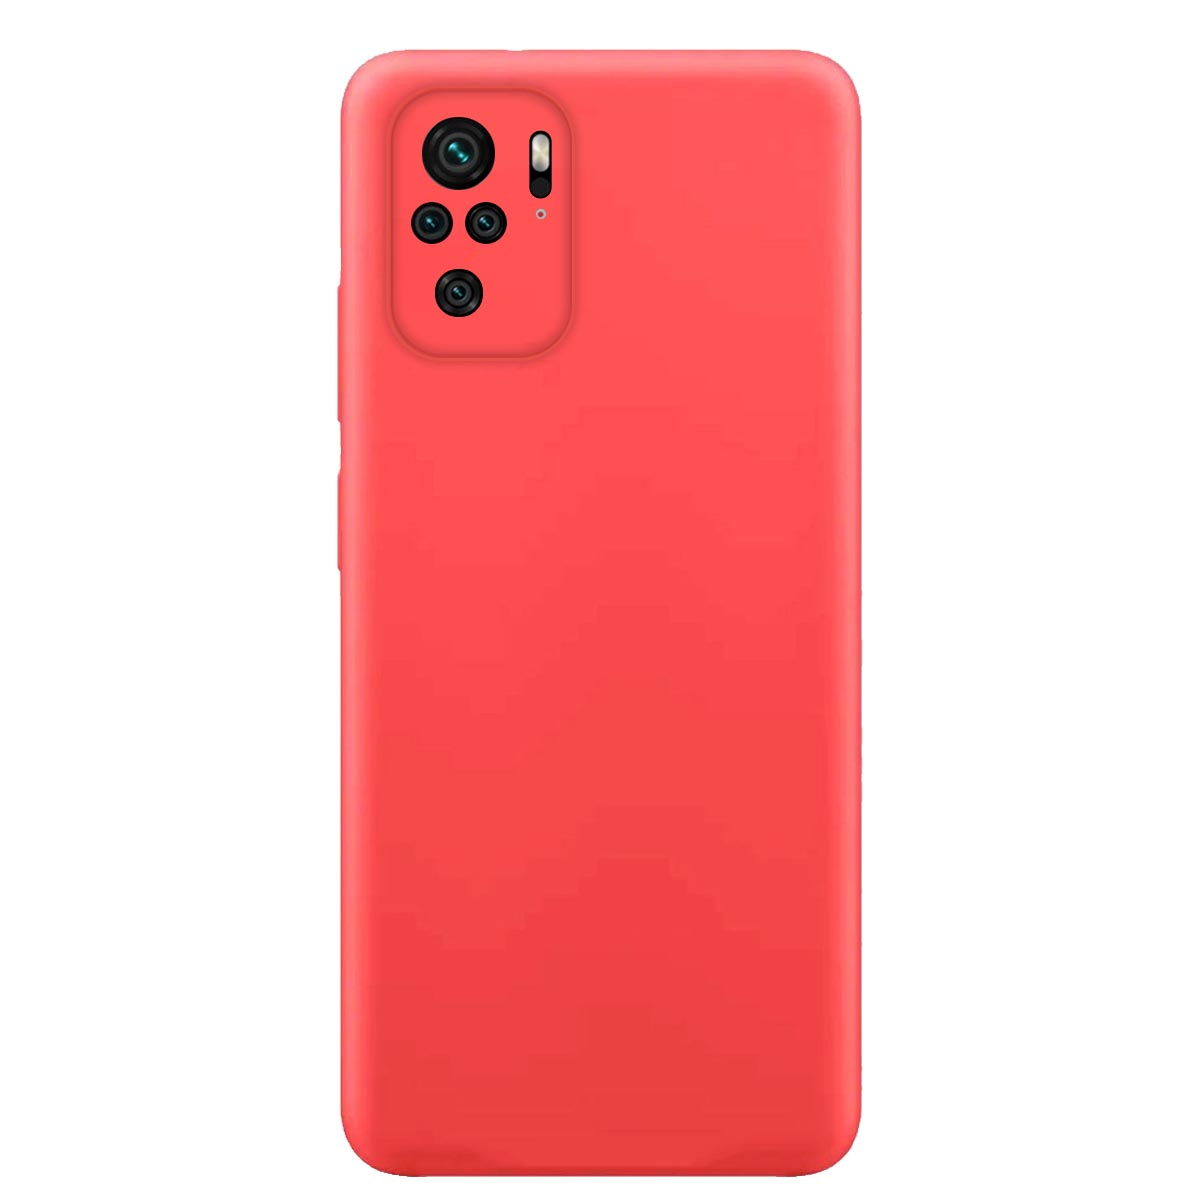 MTB MORE Redmi Soft Silikon Note Rot Note Redmi ENERGY 10S, 10 Xiaomi, Backcover, 4G, Case